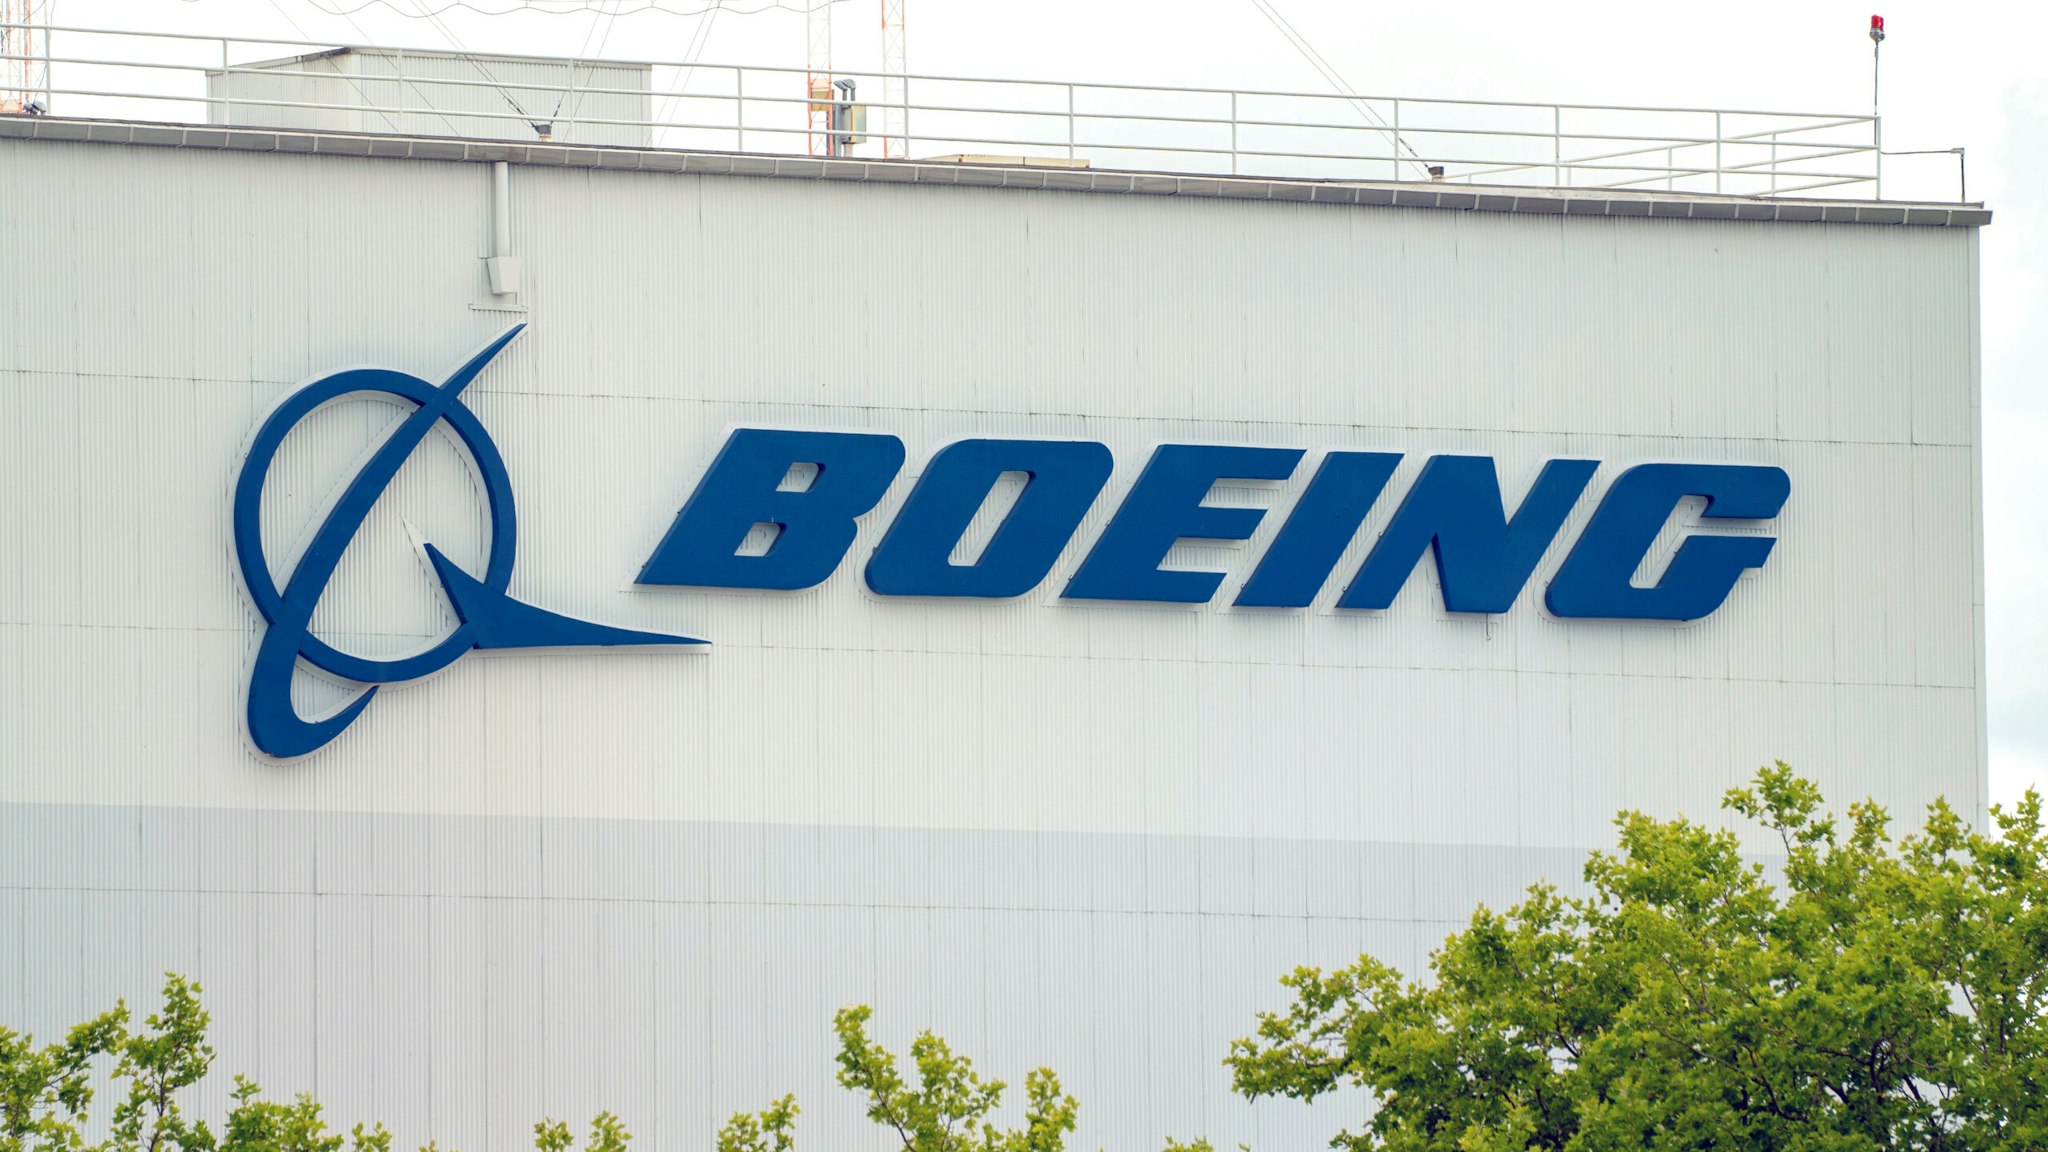 The Boeing logo on a building at Boeing Field in Seattle, Washington, US, on Tuesday, July 25, 2023. Boeing Co. is scheduled to release earnings figures on July 26.